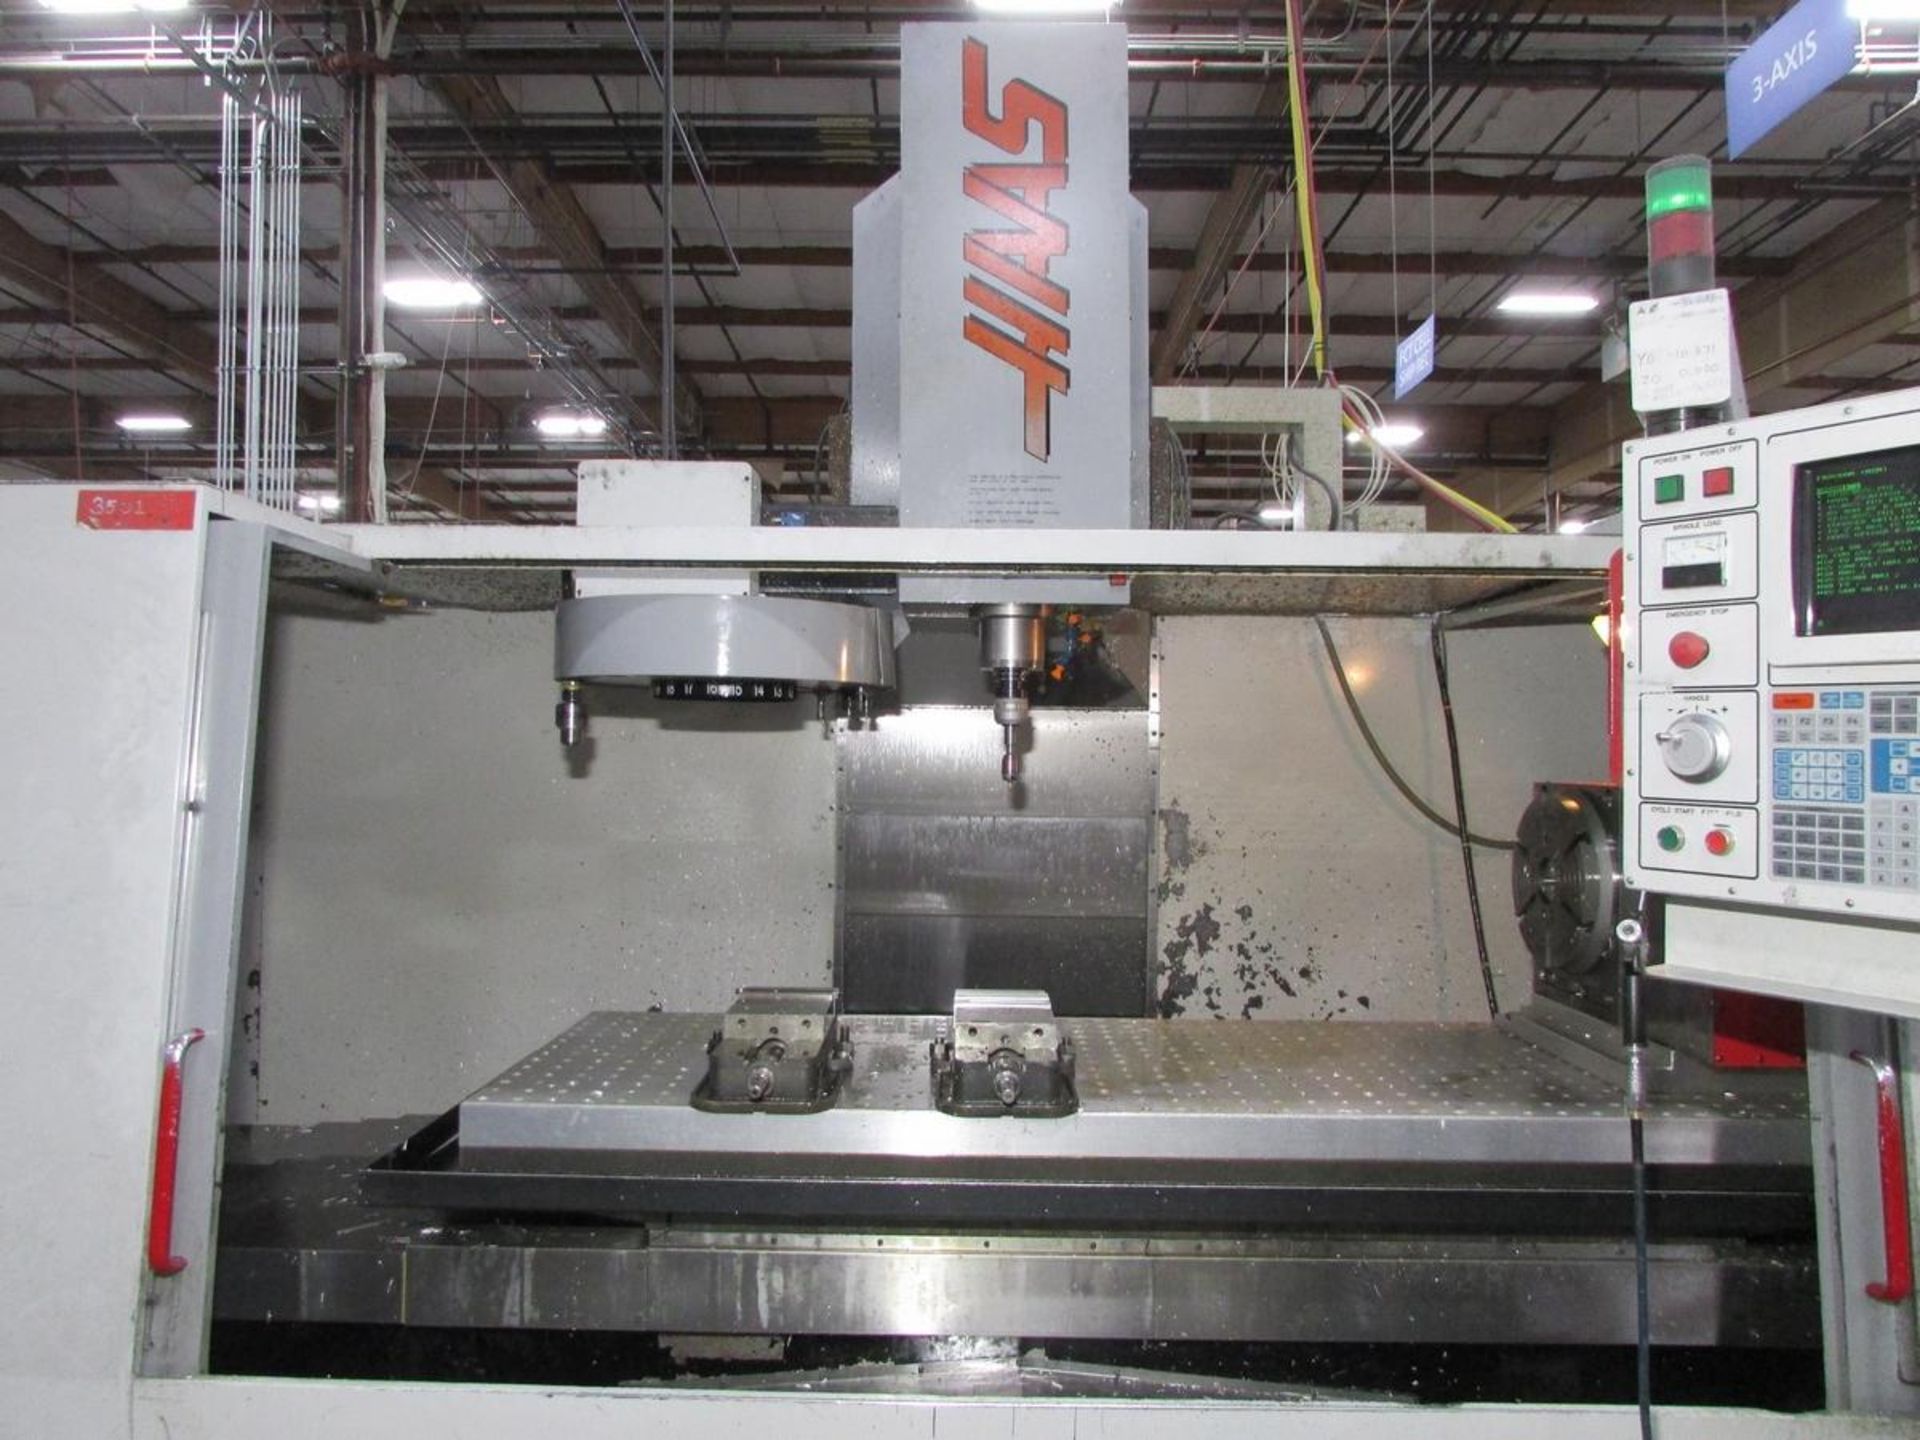 1997 Haas VF-7 4-Axis CNC Vertical Maching Center - Image 5 of 30